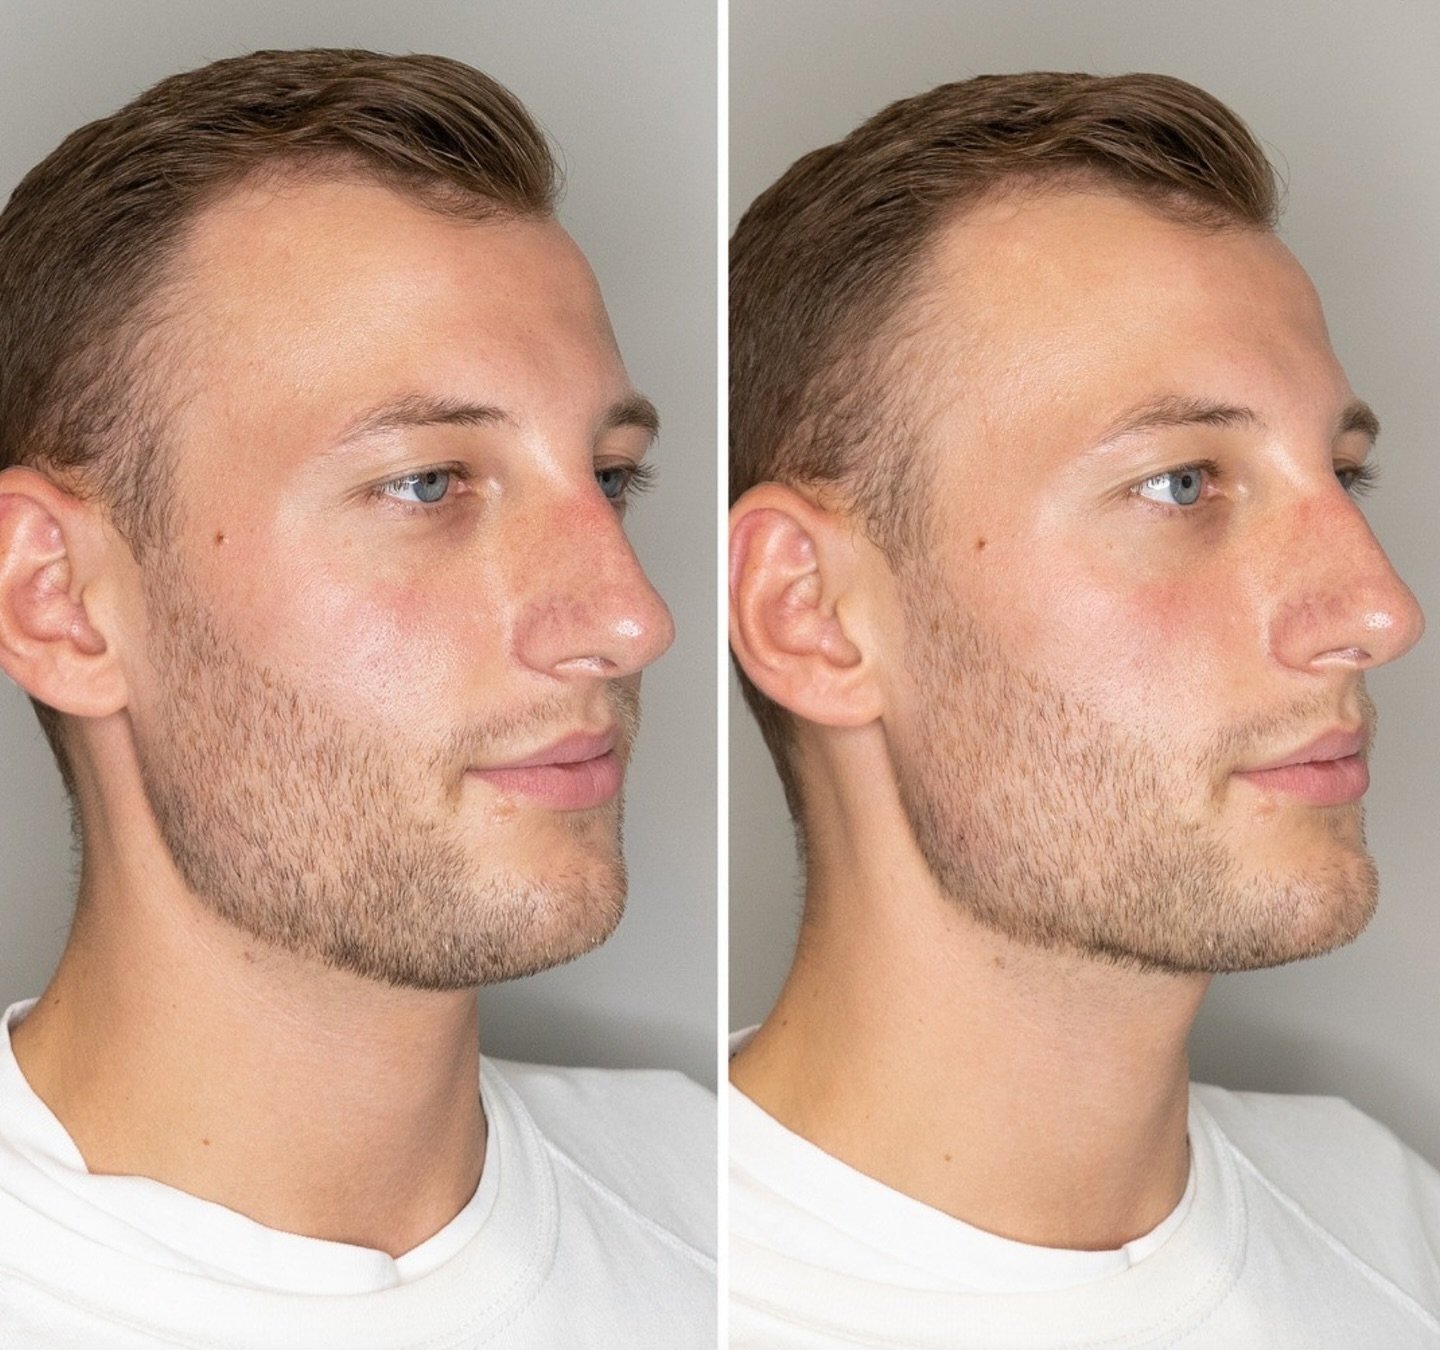 Cheeks, Jawline contour and chin projection, all have a major impact on your overall facial balance. If you&rsquo;ve been thinking about improving your best features, come see us for a free consultation.